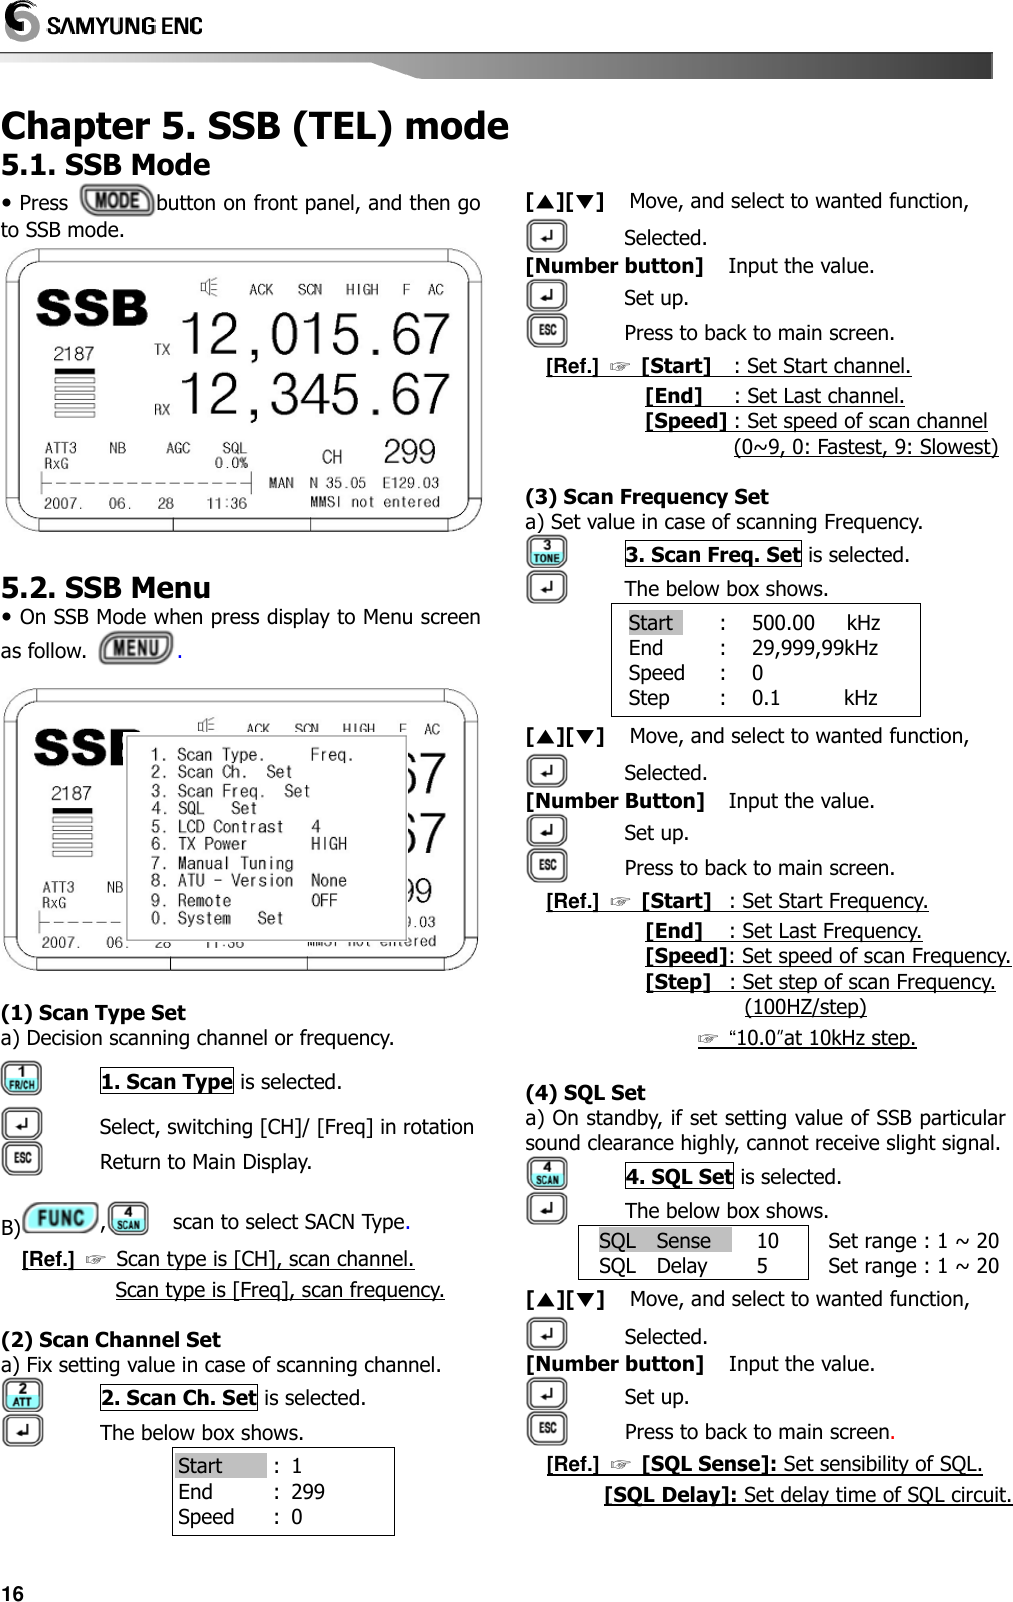   16 Chapter 5. SSB (TEL) mode 5.1. SSB Mode  Press  button on front panel, and then go to SSB mode.              5.2. SSB Menu  On SSB Mode when press display to Menu screen as follow.  .  (1) Scan Type Set a) Decision scanning channel or frequency.            1. Scan Type is selected.            Select, switching [CH]/ [Freq] in rotation            Return to Main Display.  B) ,      scan to select SACN Type. [Ref.]  ☞ Scan type is [CH], scan channel. Scan type is [Freq], scan frequency.  (2) Scan Channel Set a) Fix setting value in case of scanning channel.            2. Scan Ch. Set is selected.            The below box shows. Start End Speed : : : 1 299 0 [▲][▼]     Move, and select to wanted function,            Selected. [Number button]     Input the value.            Set up.            Press to back to main screen. [Ref.]  ☞ [Start]     : Set Start channel. [End]      : Set Last channel. [Speed]  : Set speed of scan channel (0~9, 0: Fastest, 9: Slowest)  (3) Scan Frequency Set   a) Set value in case of scanning Frequency.            3. Scan Freq. Set is selected.            The below box shows. Start  End Speed Step : : : : 500.00      kHz 29,999,99kHz 0 0.1            kHz [▲][▼]     Move, and select to wanted function,            Selected. [Number Button]     Input the value.            Set up.            Press to back to main screen. [Ref.]  ☞ [Start]    : Set Start Frequency. [End]     : Set Last Frequency. [Speed]: Set speed of scan Frequency. [Step]    : Set step of scan Frequency. (100HZ/step) ☞ “10.0”at 10kHz step.  (4) SQL Set   a) On standby, if set setting value of SSB particular sound clearance highly, cannot receive slight signal.            4. SQL Set is selected.            The below box shows. SQL    Sense    SQL    Delay ::10 5 Set range : 1 ~ 20 Set range : 1 ~ 20 [▲][▼]     Move, and select to wanted function,            Selected. [Number button]     Input the value.            Set up.            Press to back to main screen. [Ref.]  ☞ [SQL Sense]: Set sensibility of SQL. [SQL Delay]: Set delay time of SQL circuit. 